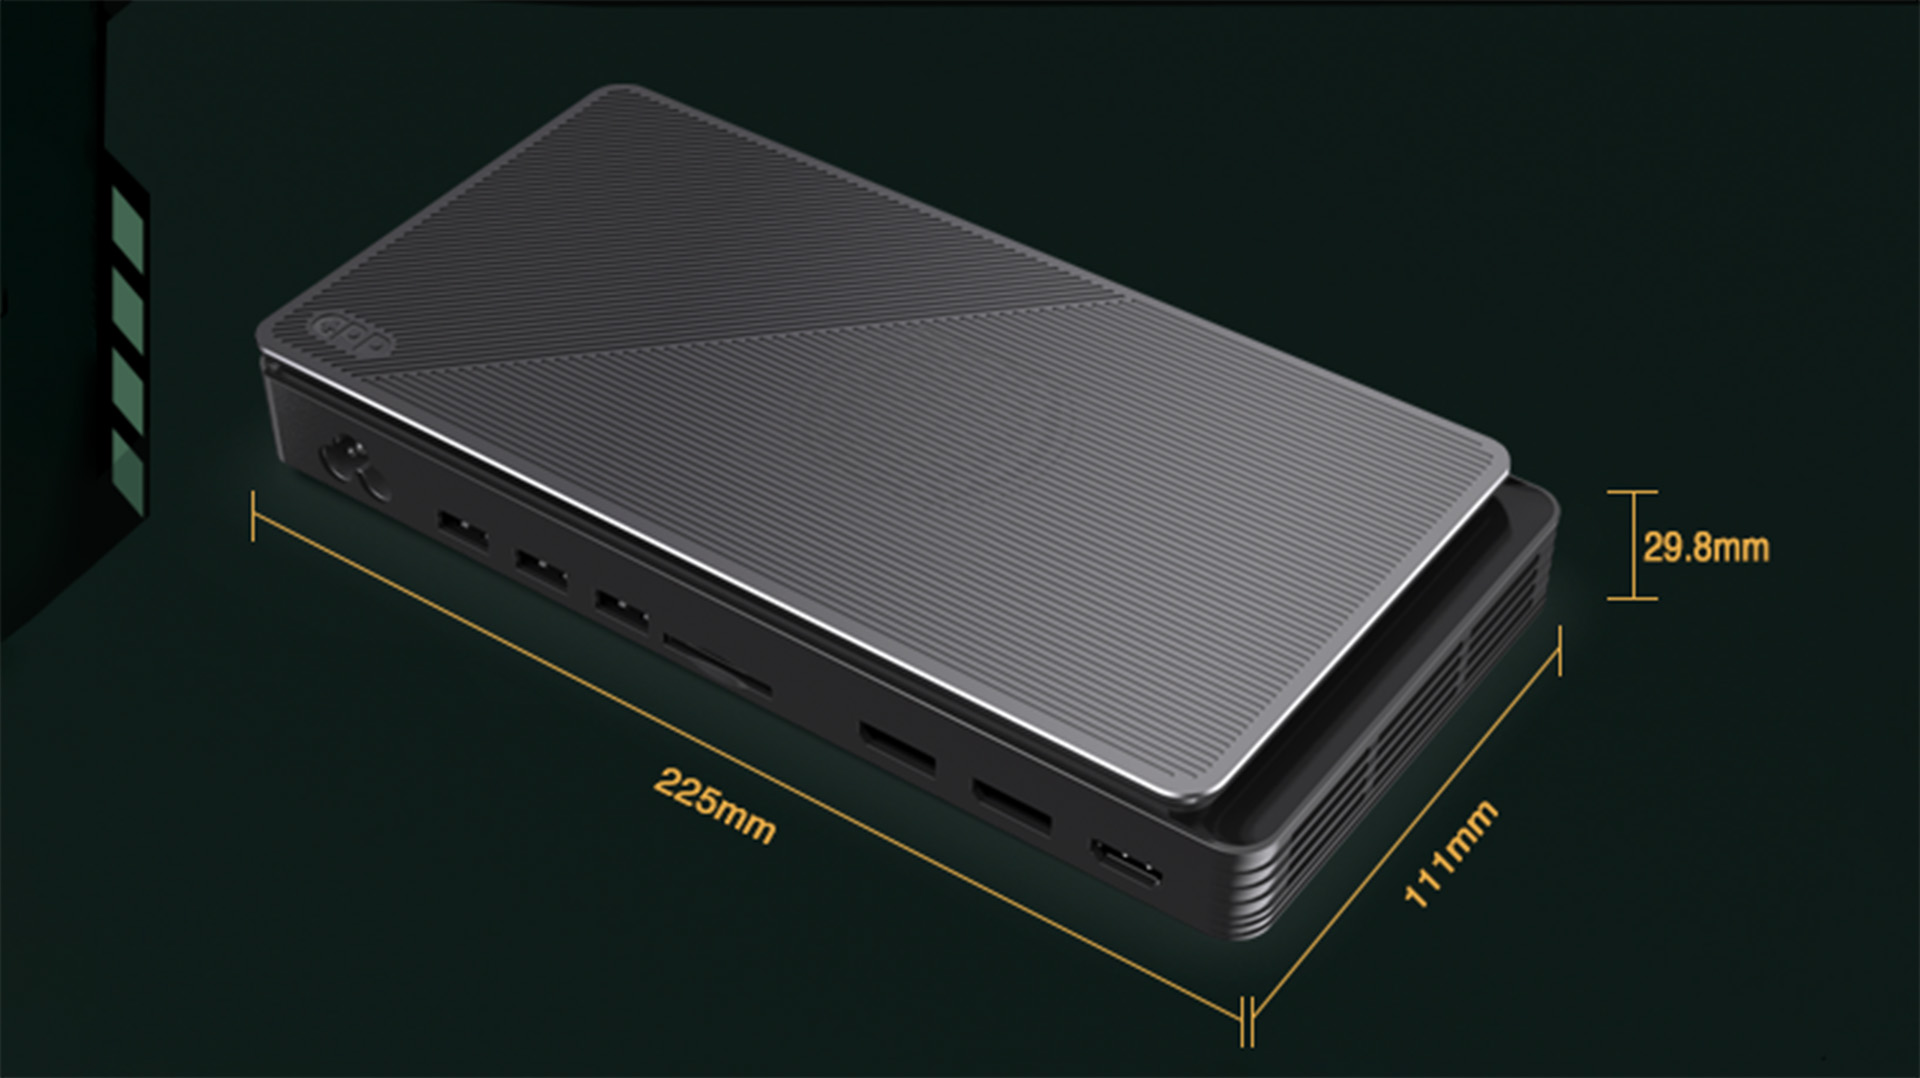 The 'world's smallest' external GPU would make for a super